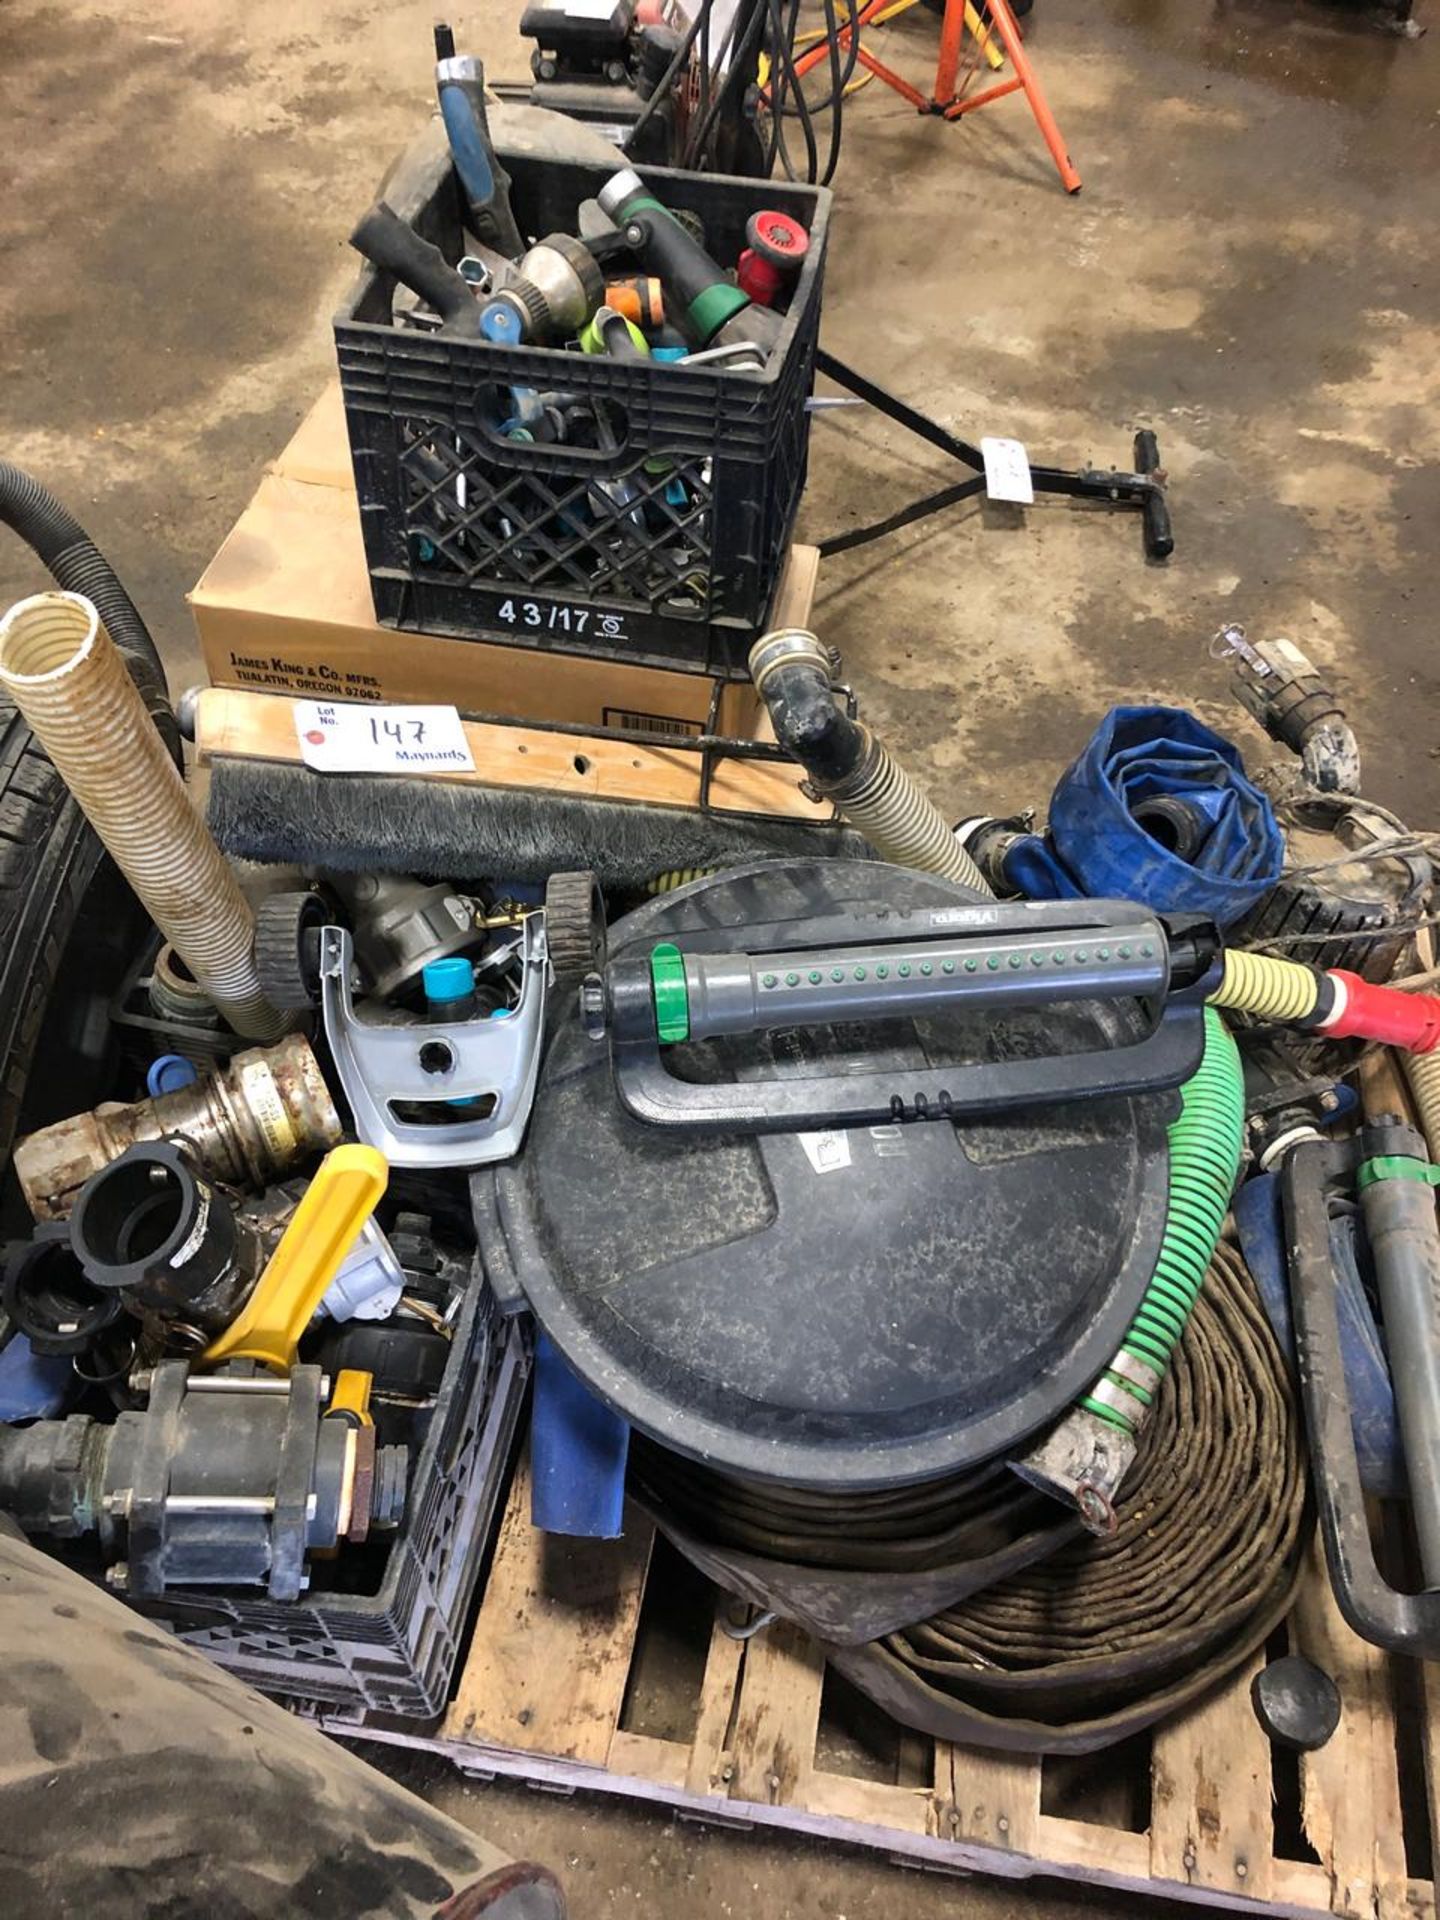 Skid of Hoses, Hose Attachments and Pump